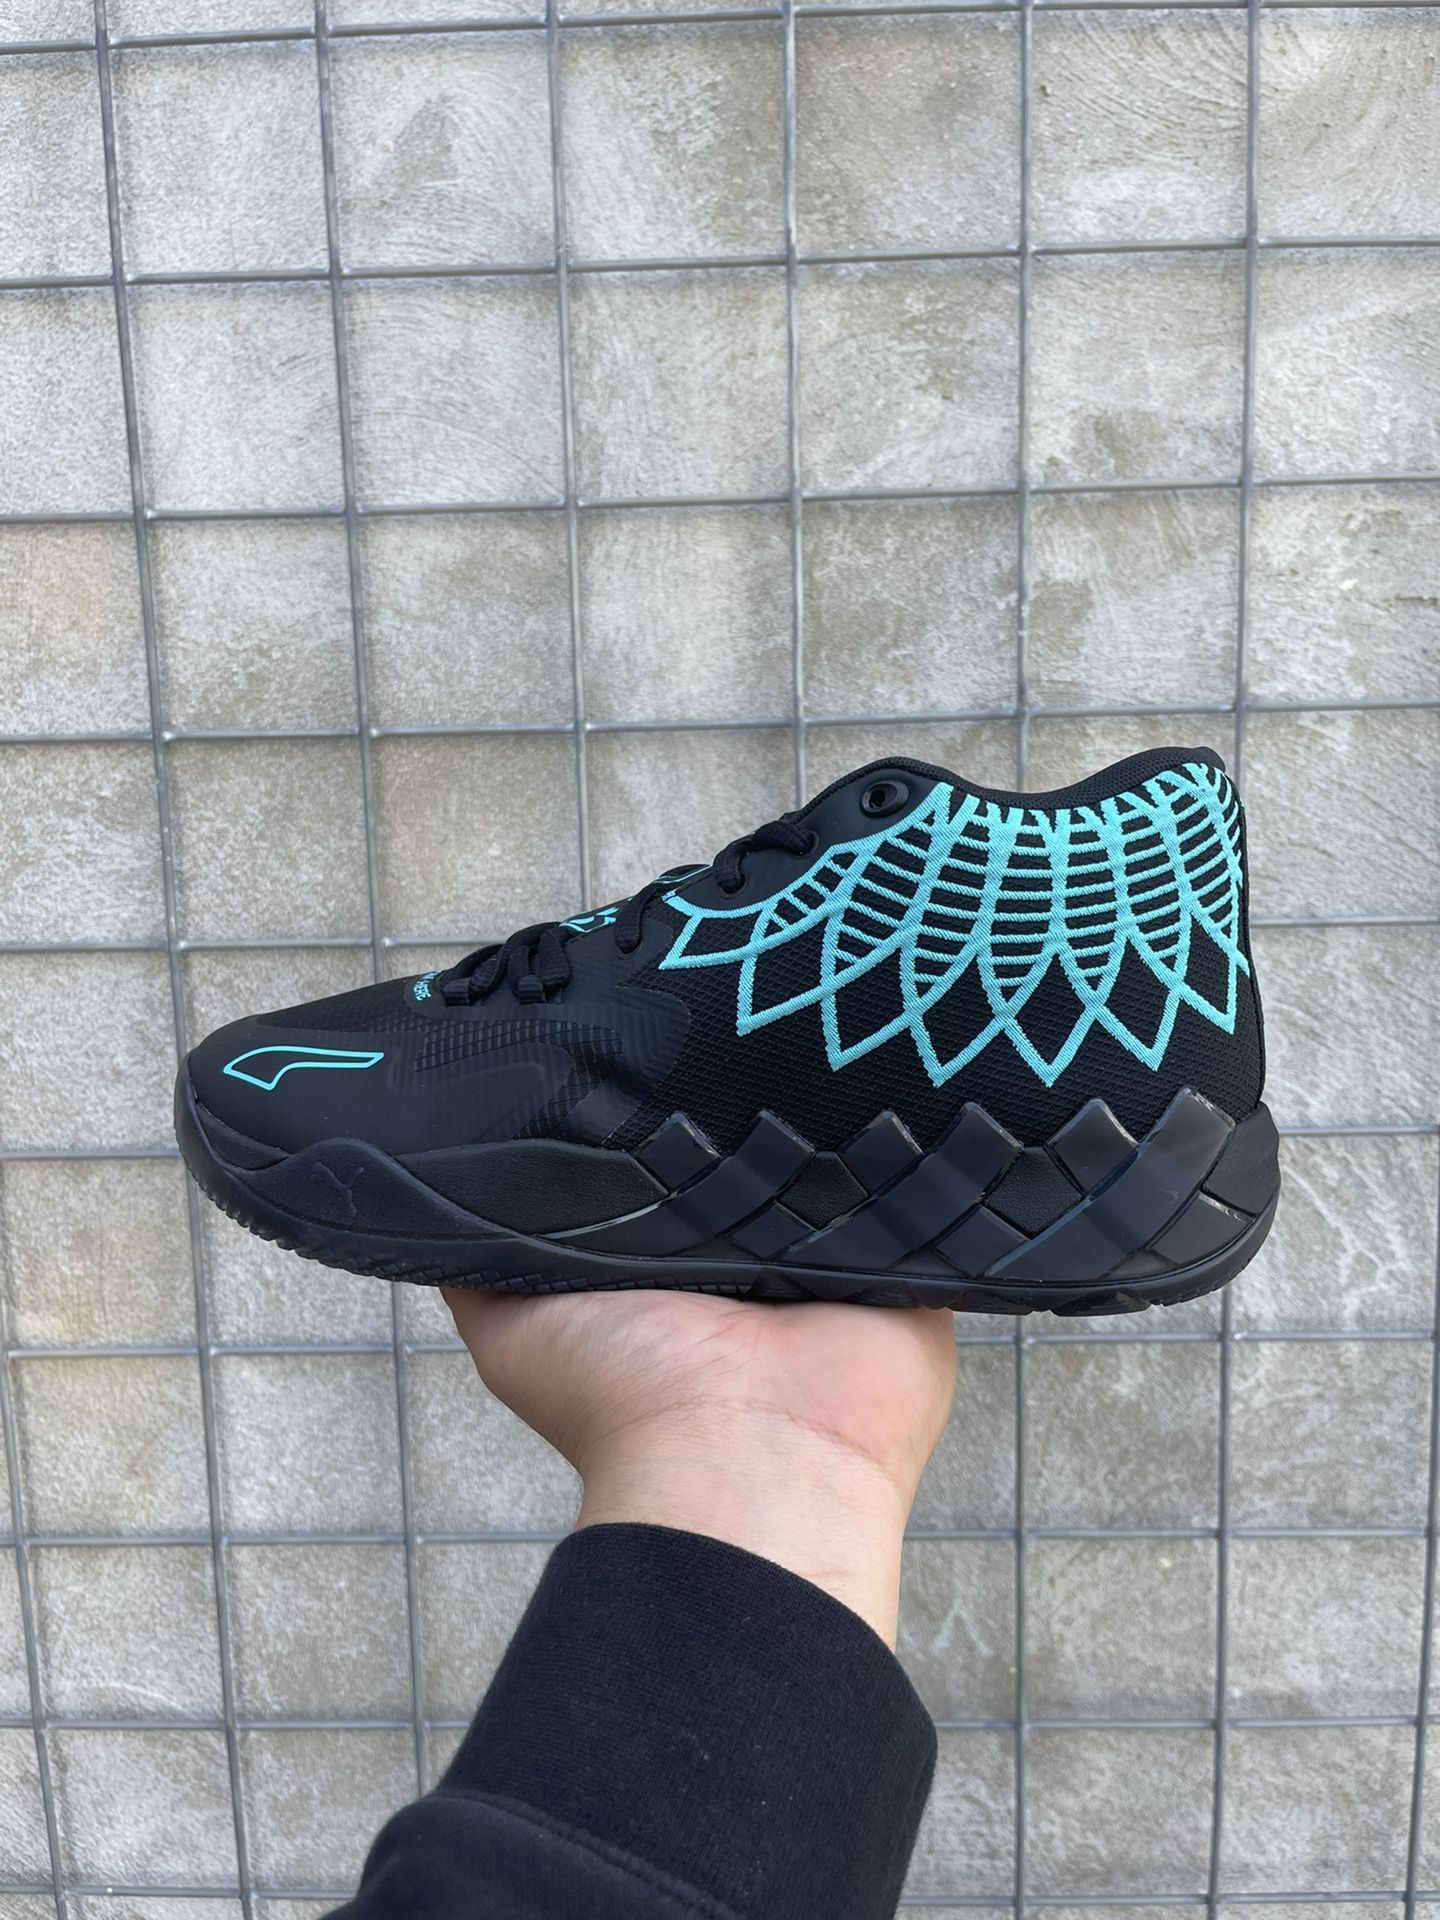 Lamelo Ball Charlotte Hornets for Sale in Palatine, IL - OfferUp